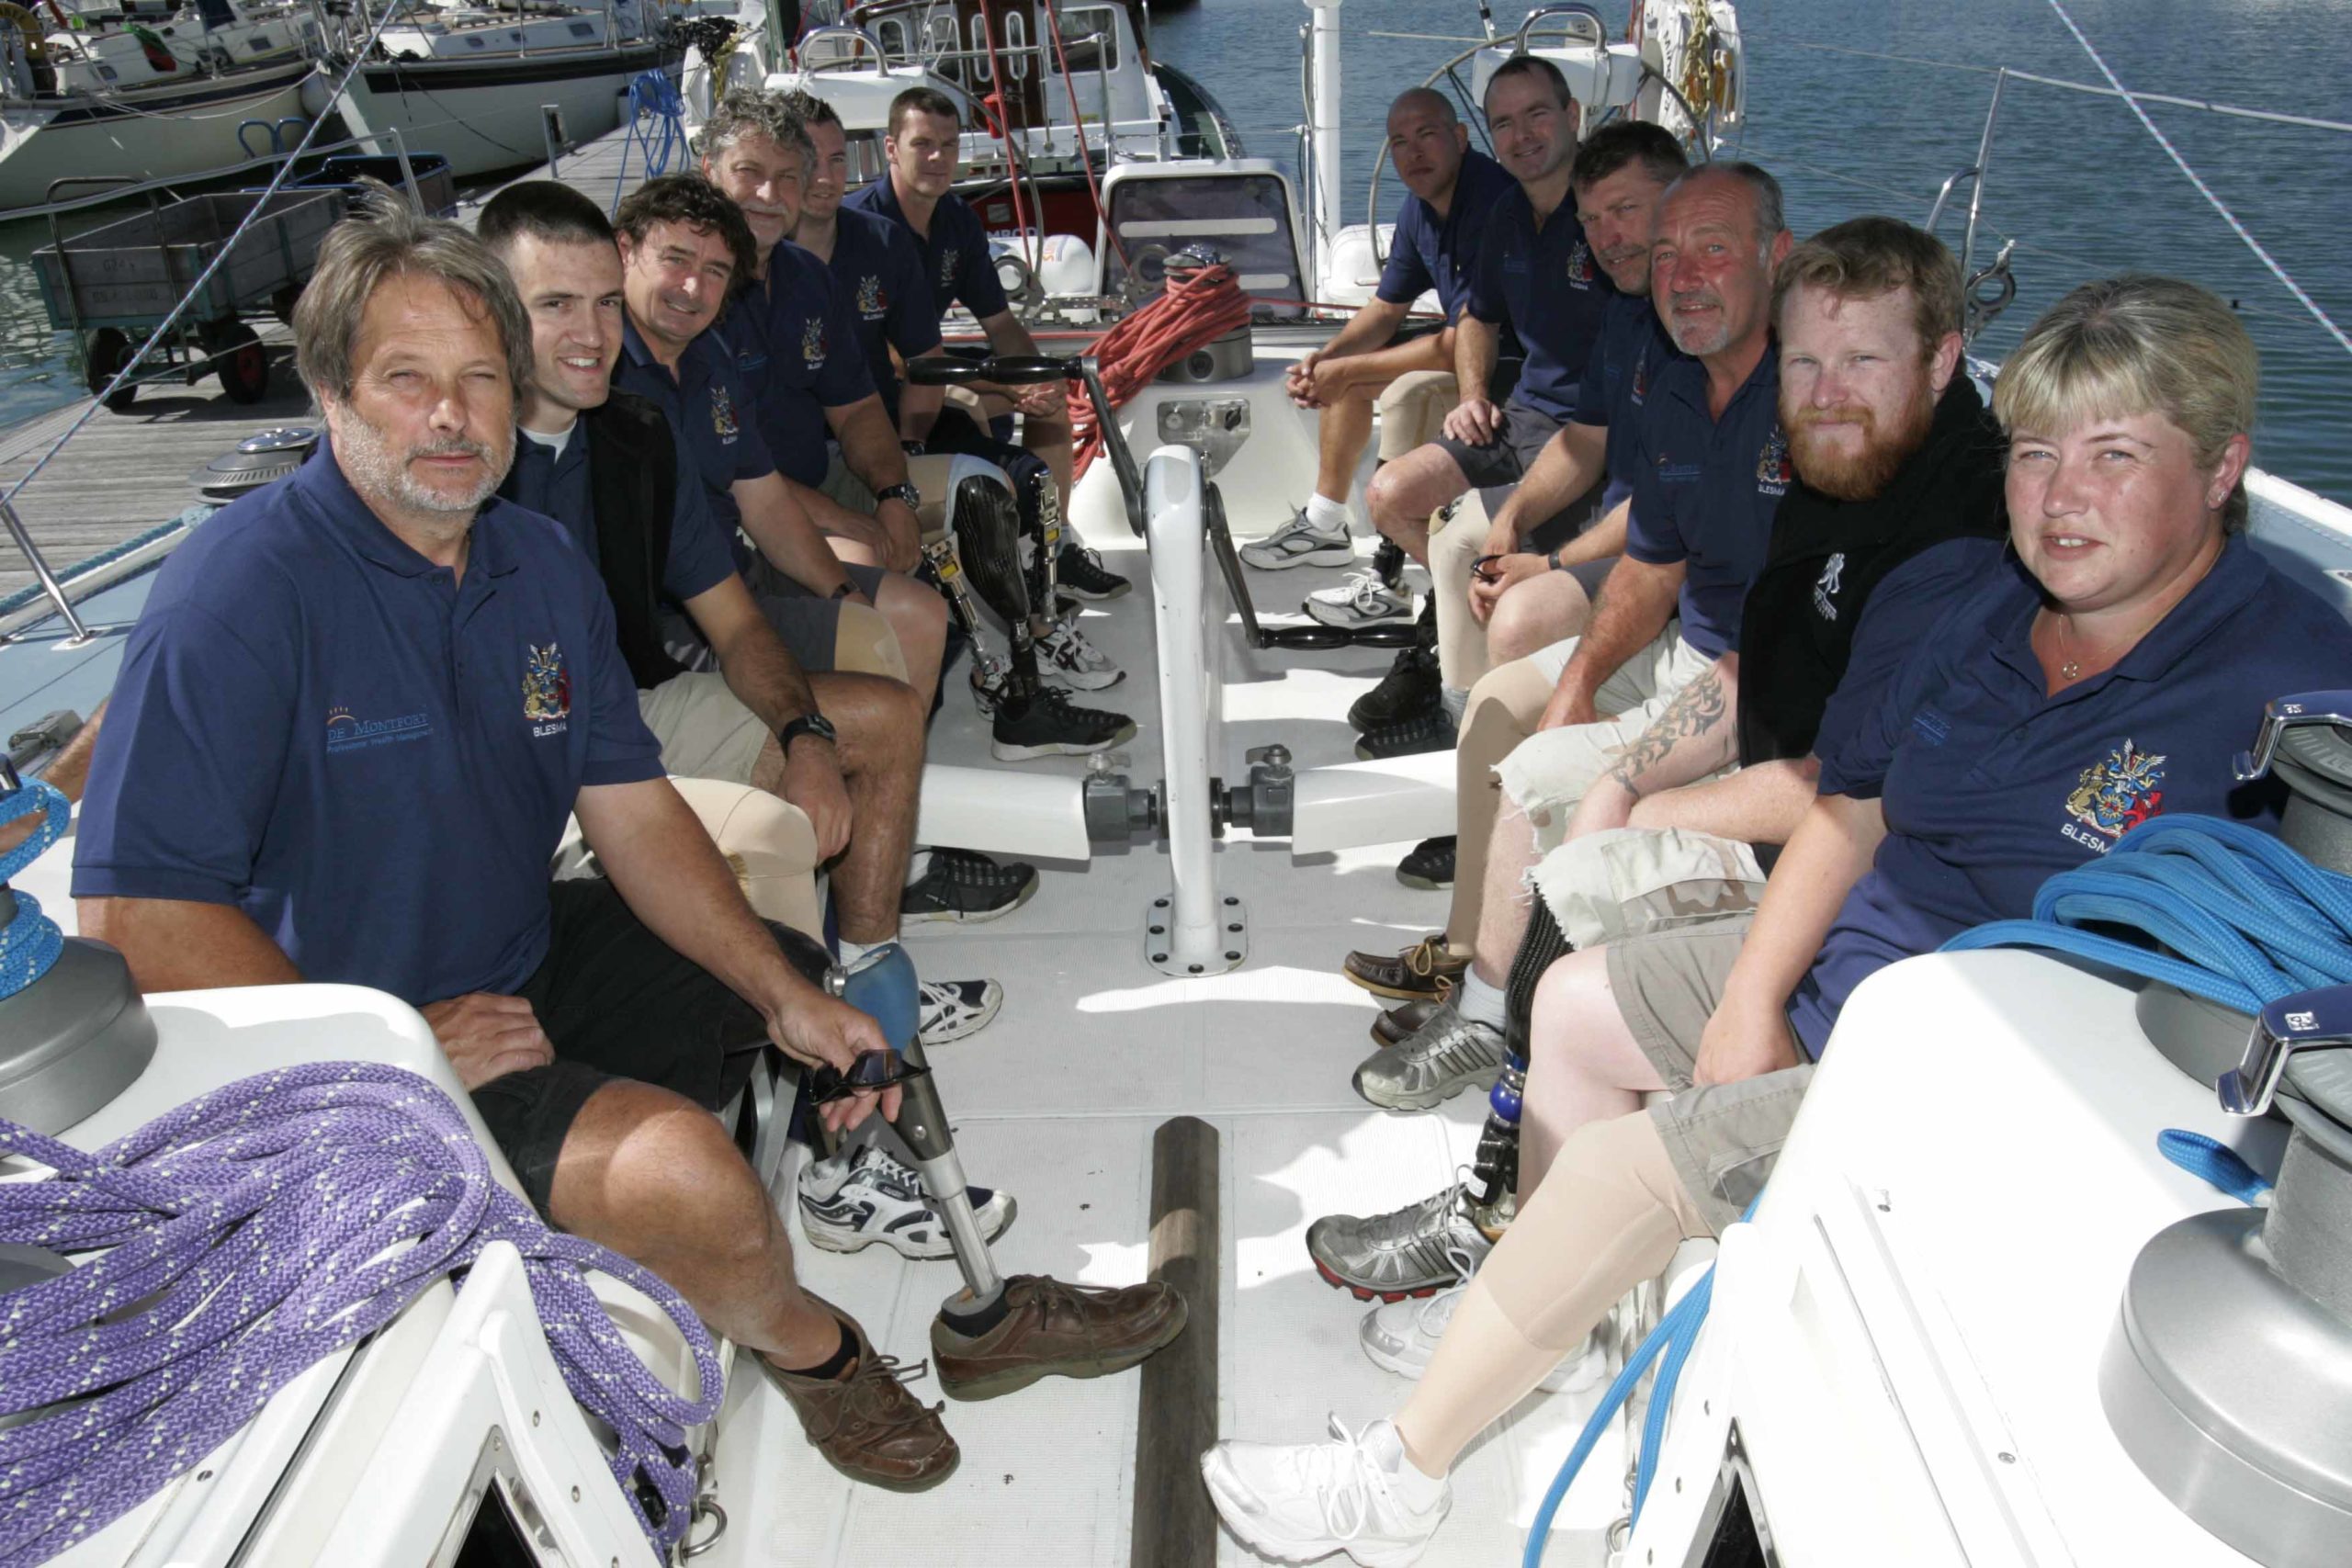 Group of Wounded Warrior participants sitting smiling at the camera on a sail boat